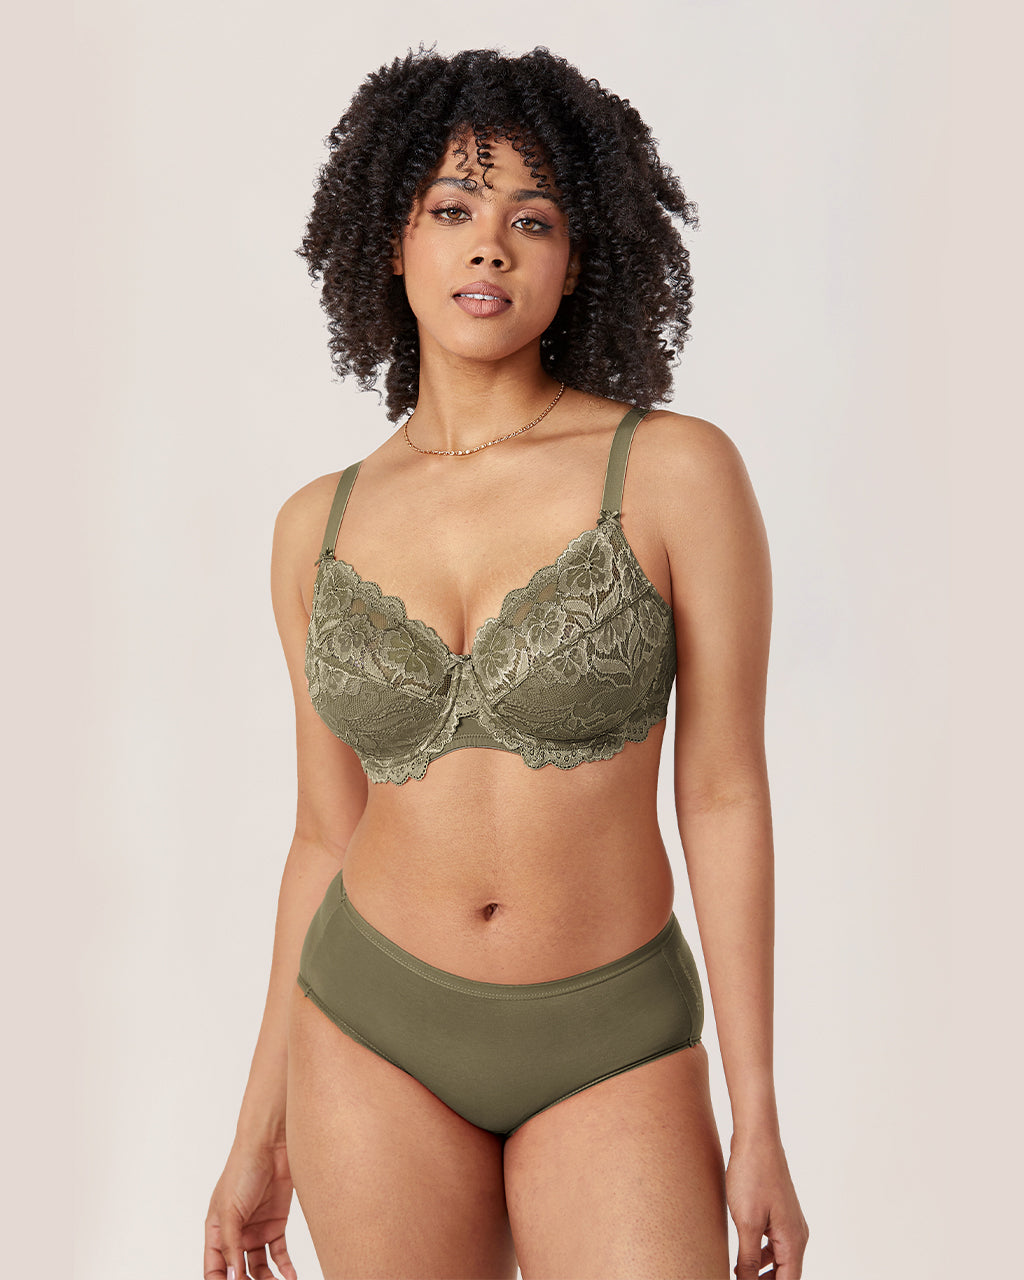  Womens Plus Size Bras Full Coverage Lace Underwire Unlined  Bra Up To J Camouflage 36J